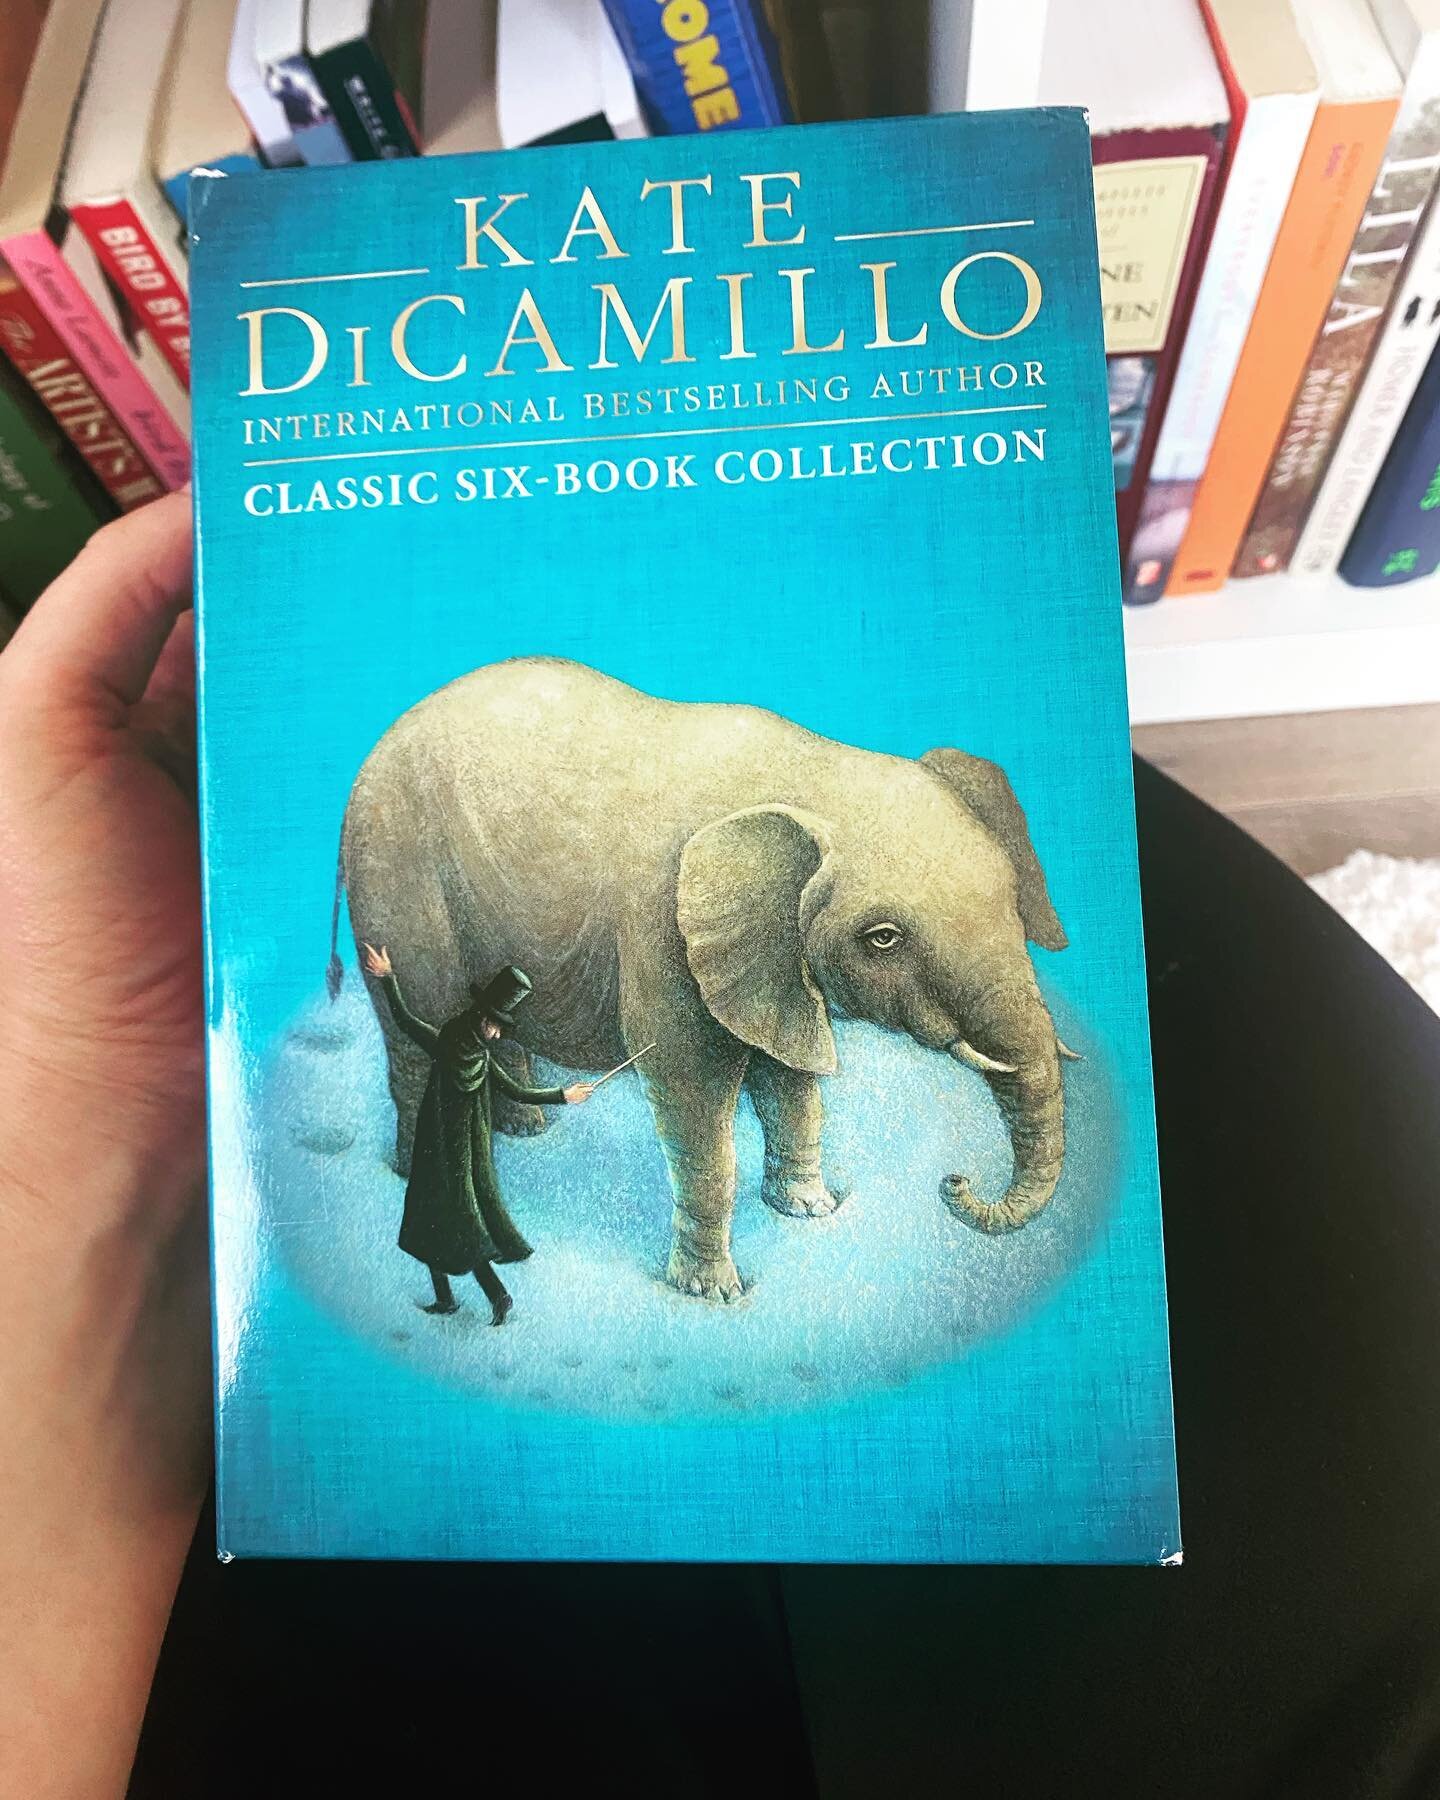 A delightful part of my continuing education: reading the authors I most admire, like Kate DiCamillo here. PLUS, a new blog post is up on Little KidLit Mountain via my website (link in bio), for all the writers banging on the door of the industry, fe